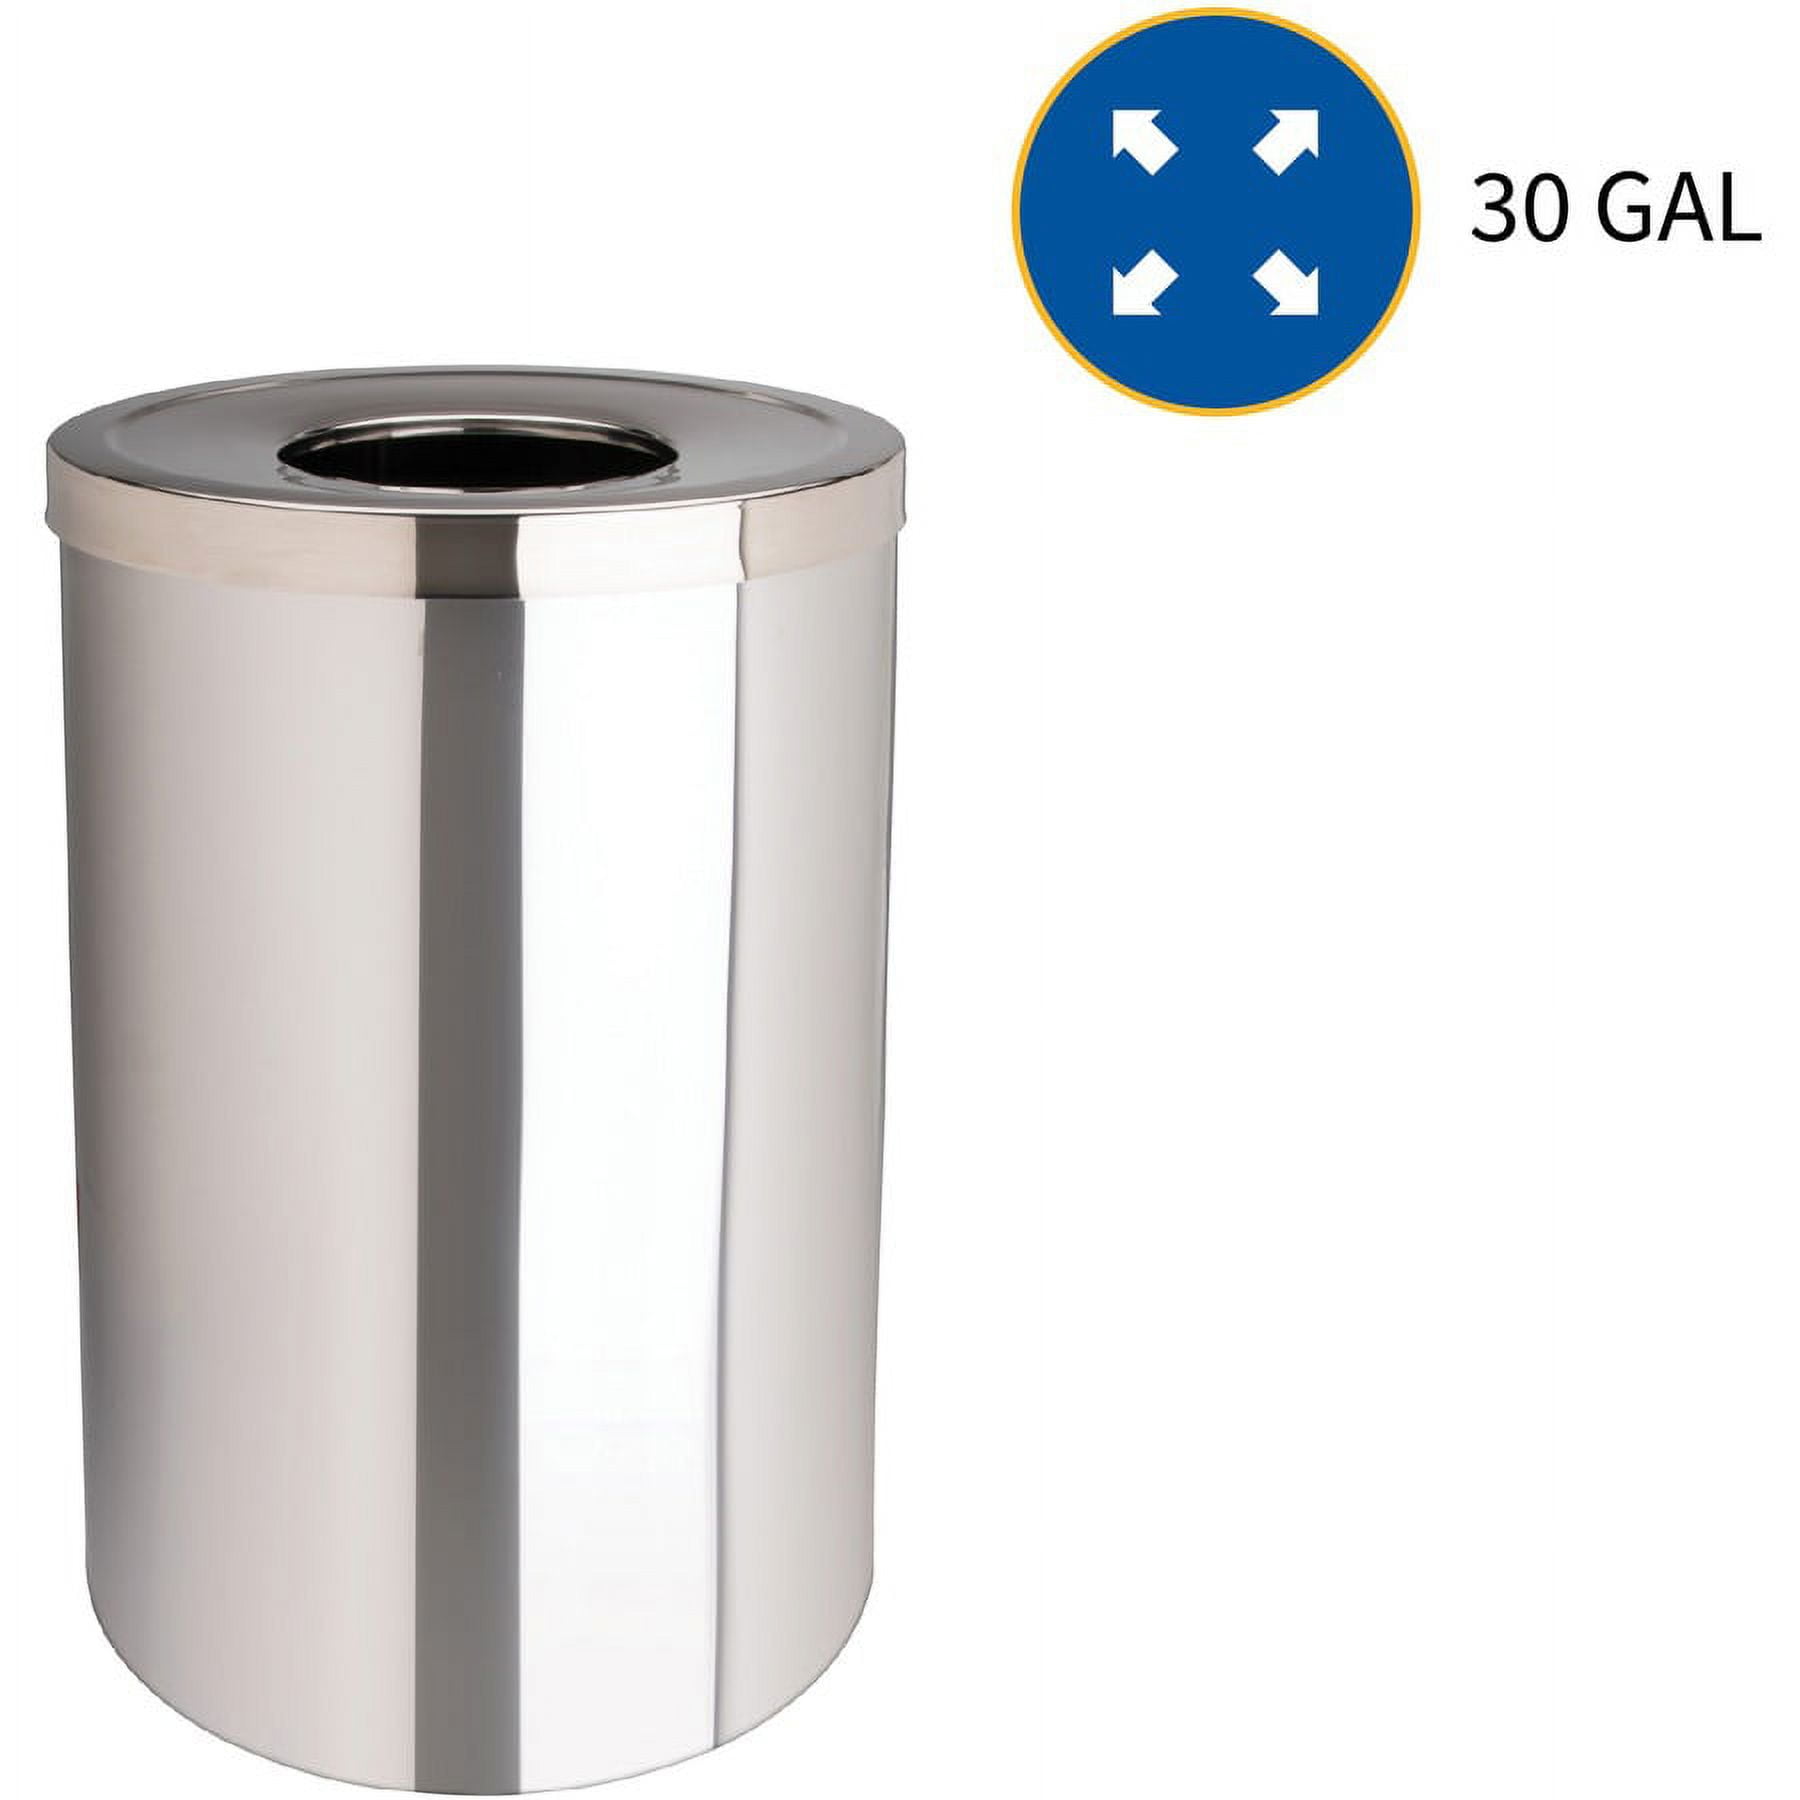 DTSE30SS Dome Top Side Entry Trash Can - 30 Gallon Capacity - 20 Dia. x 40  1/2 H - Stainless Steel